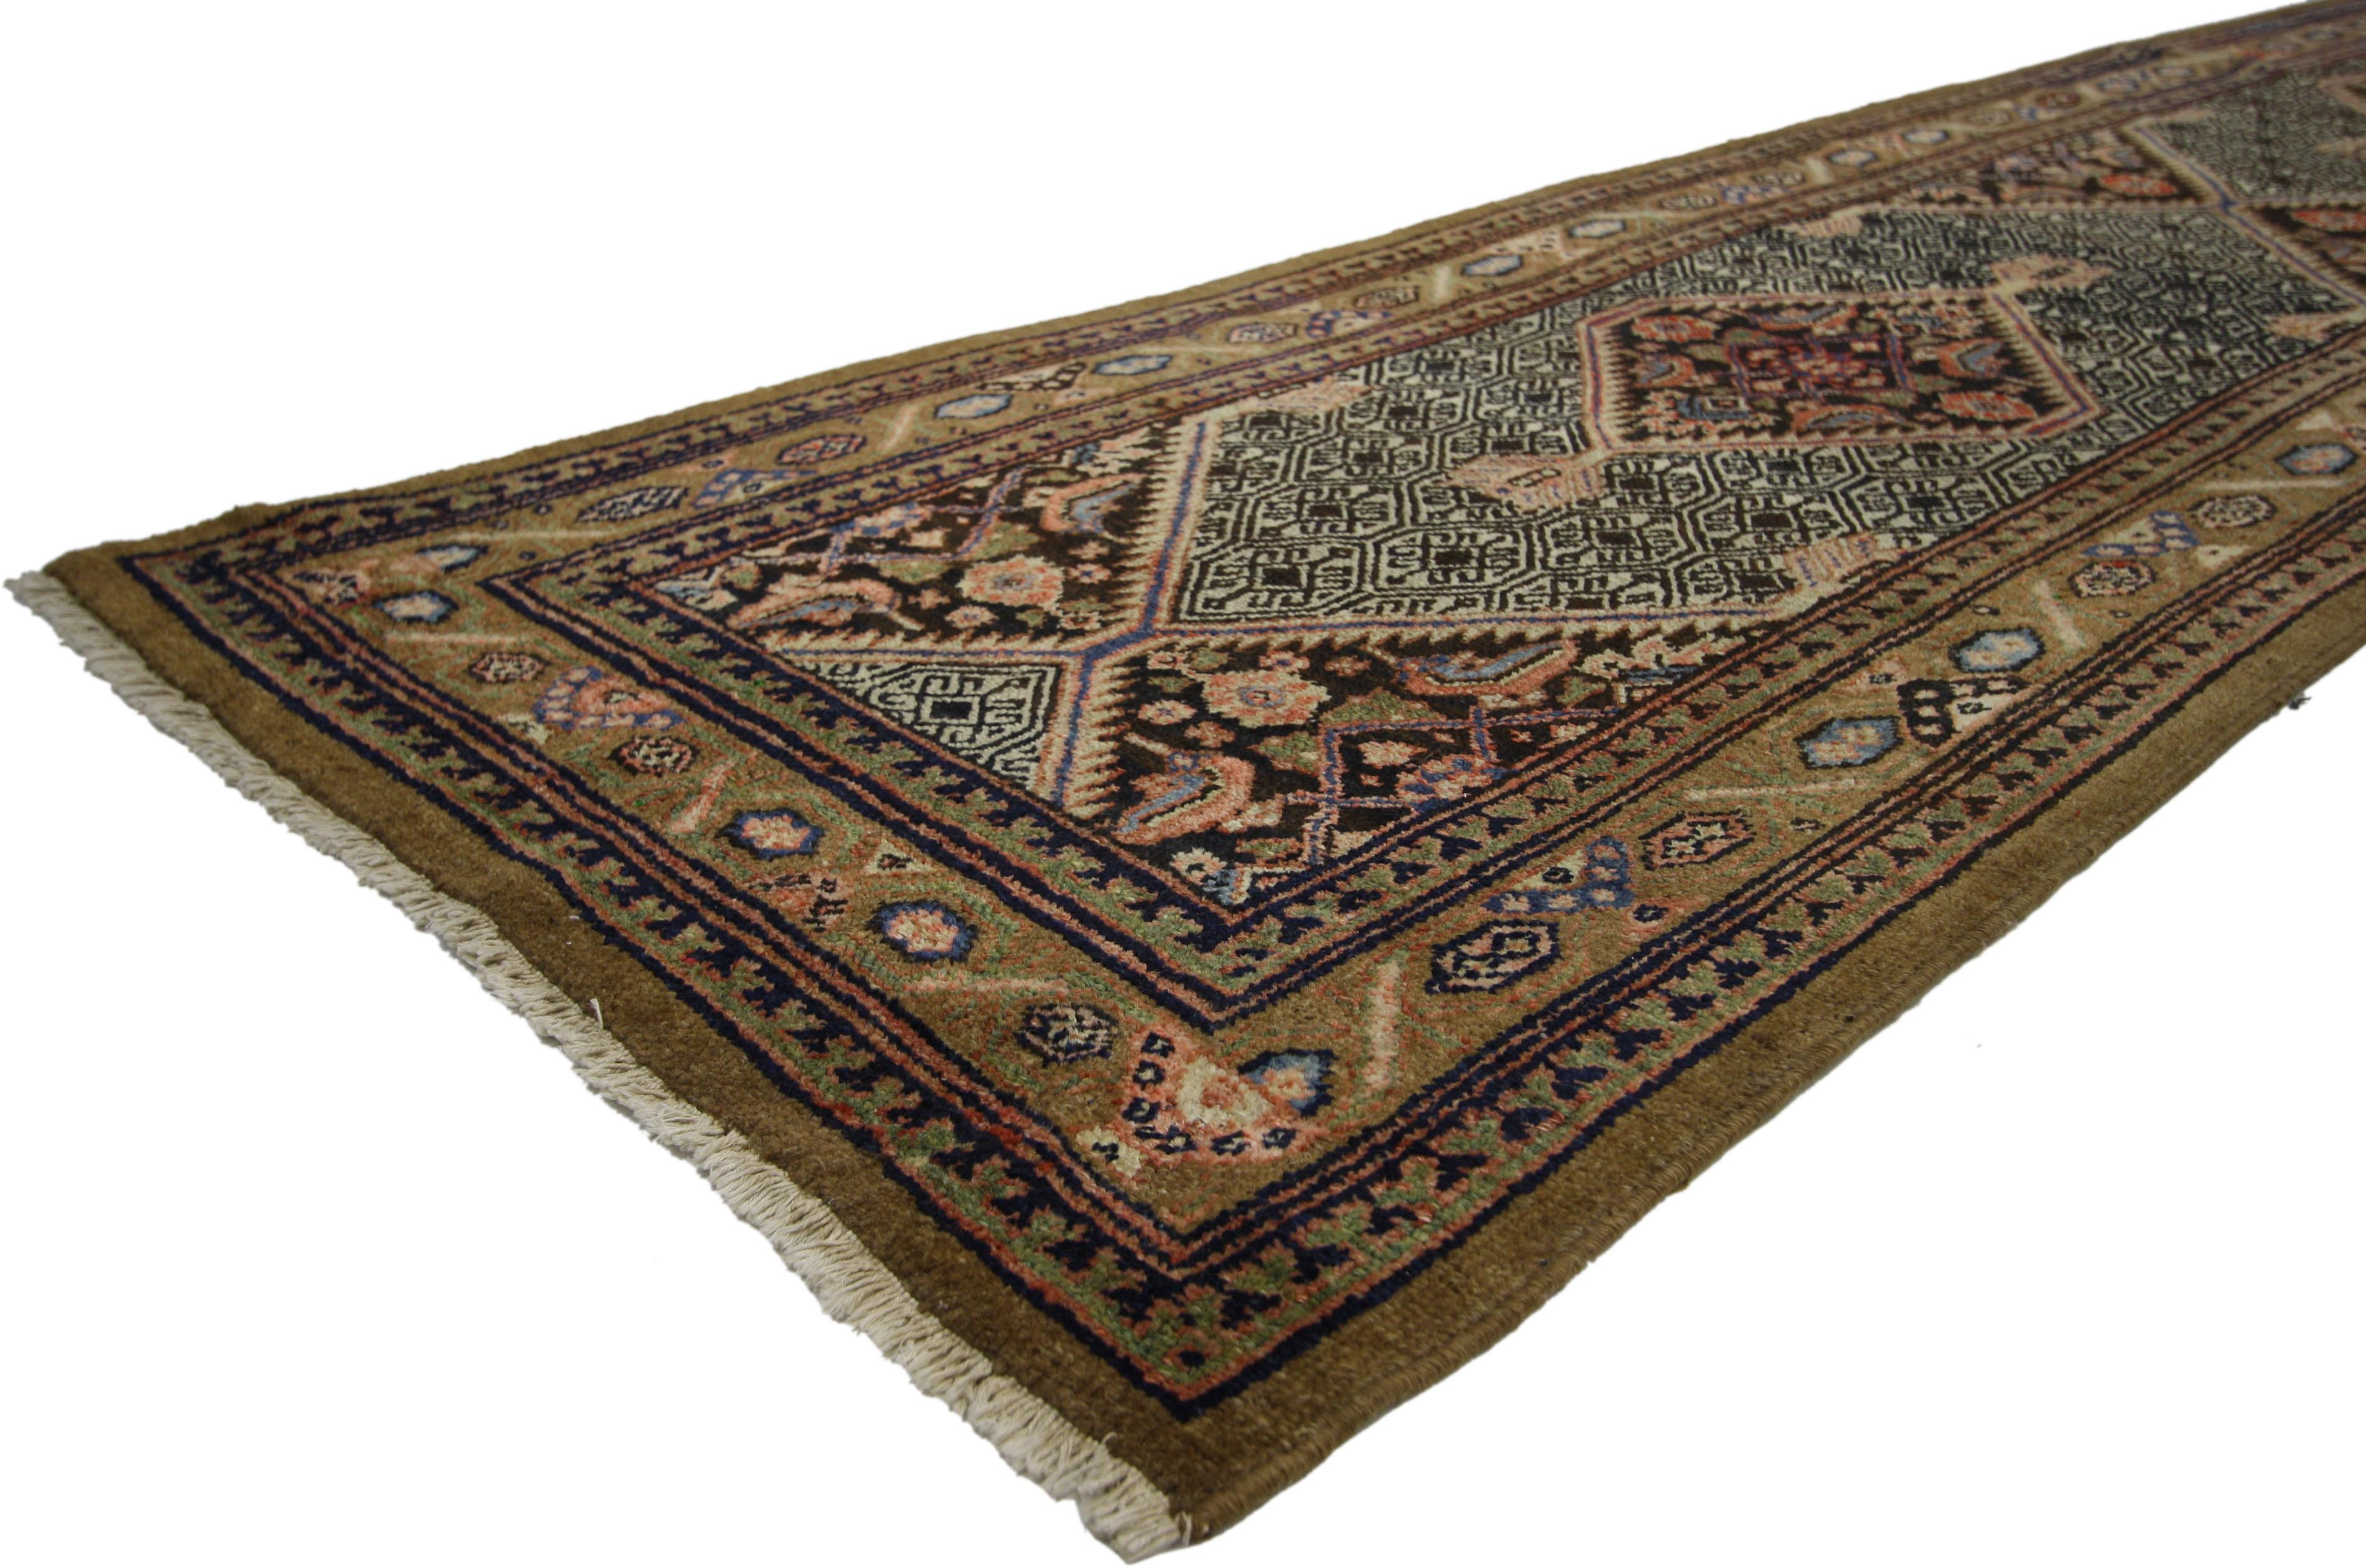 50666 Camel Hair Antique Persian Malayer Extra-Long Runner with Arts and Crafts Style 03'00 x 19'03. With a bold geometric form and Arts and Crafts style, this hand knotted wool antique Persian Malayer runner  astounds with its beauty. Warm